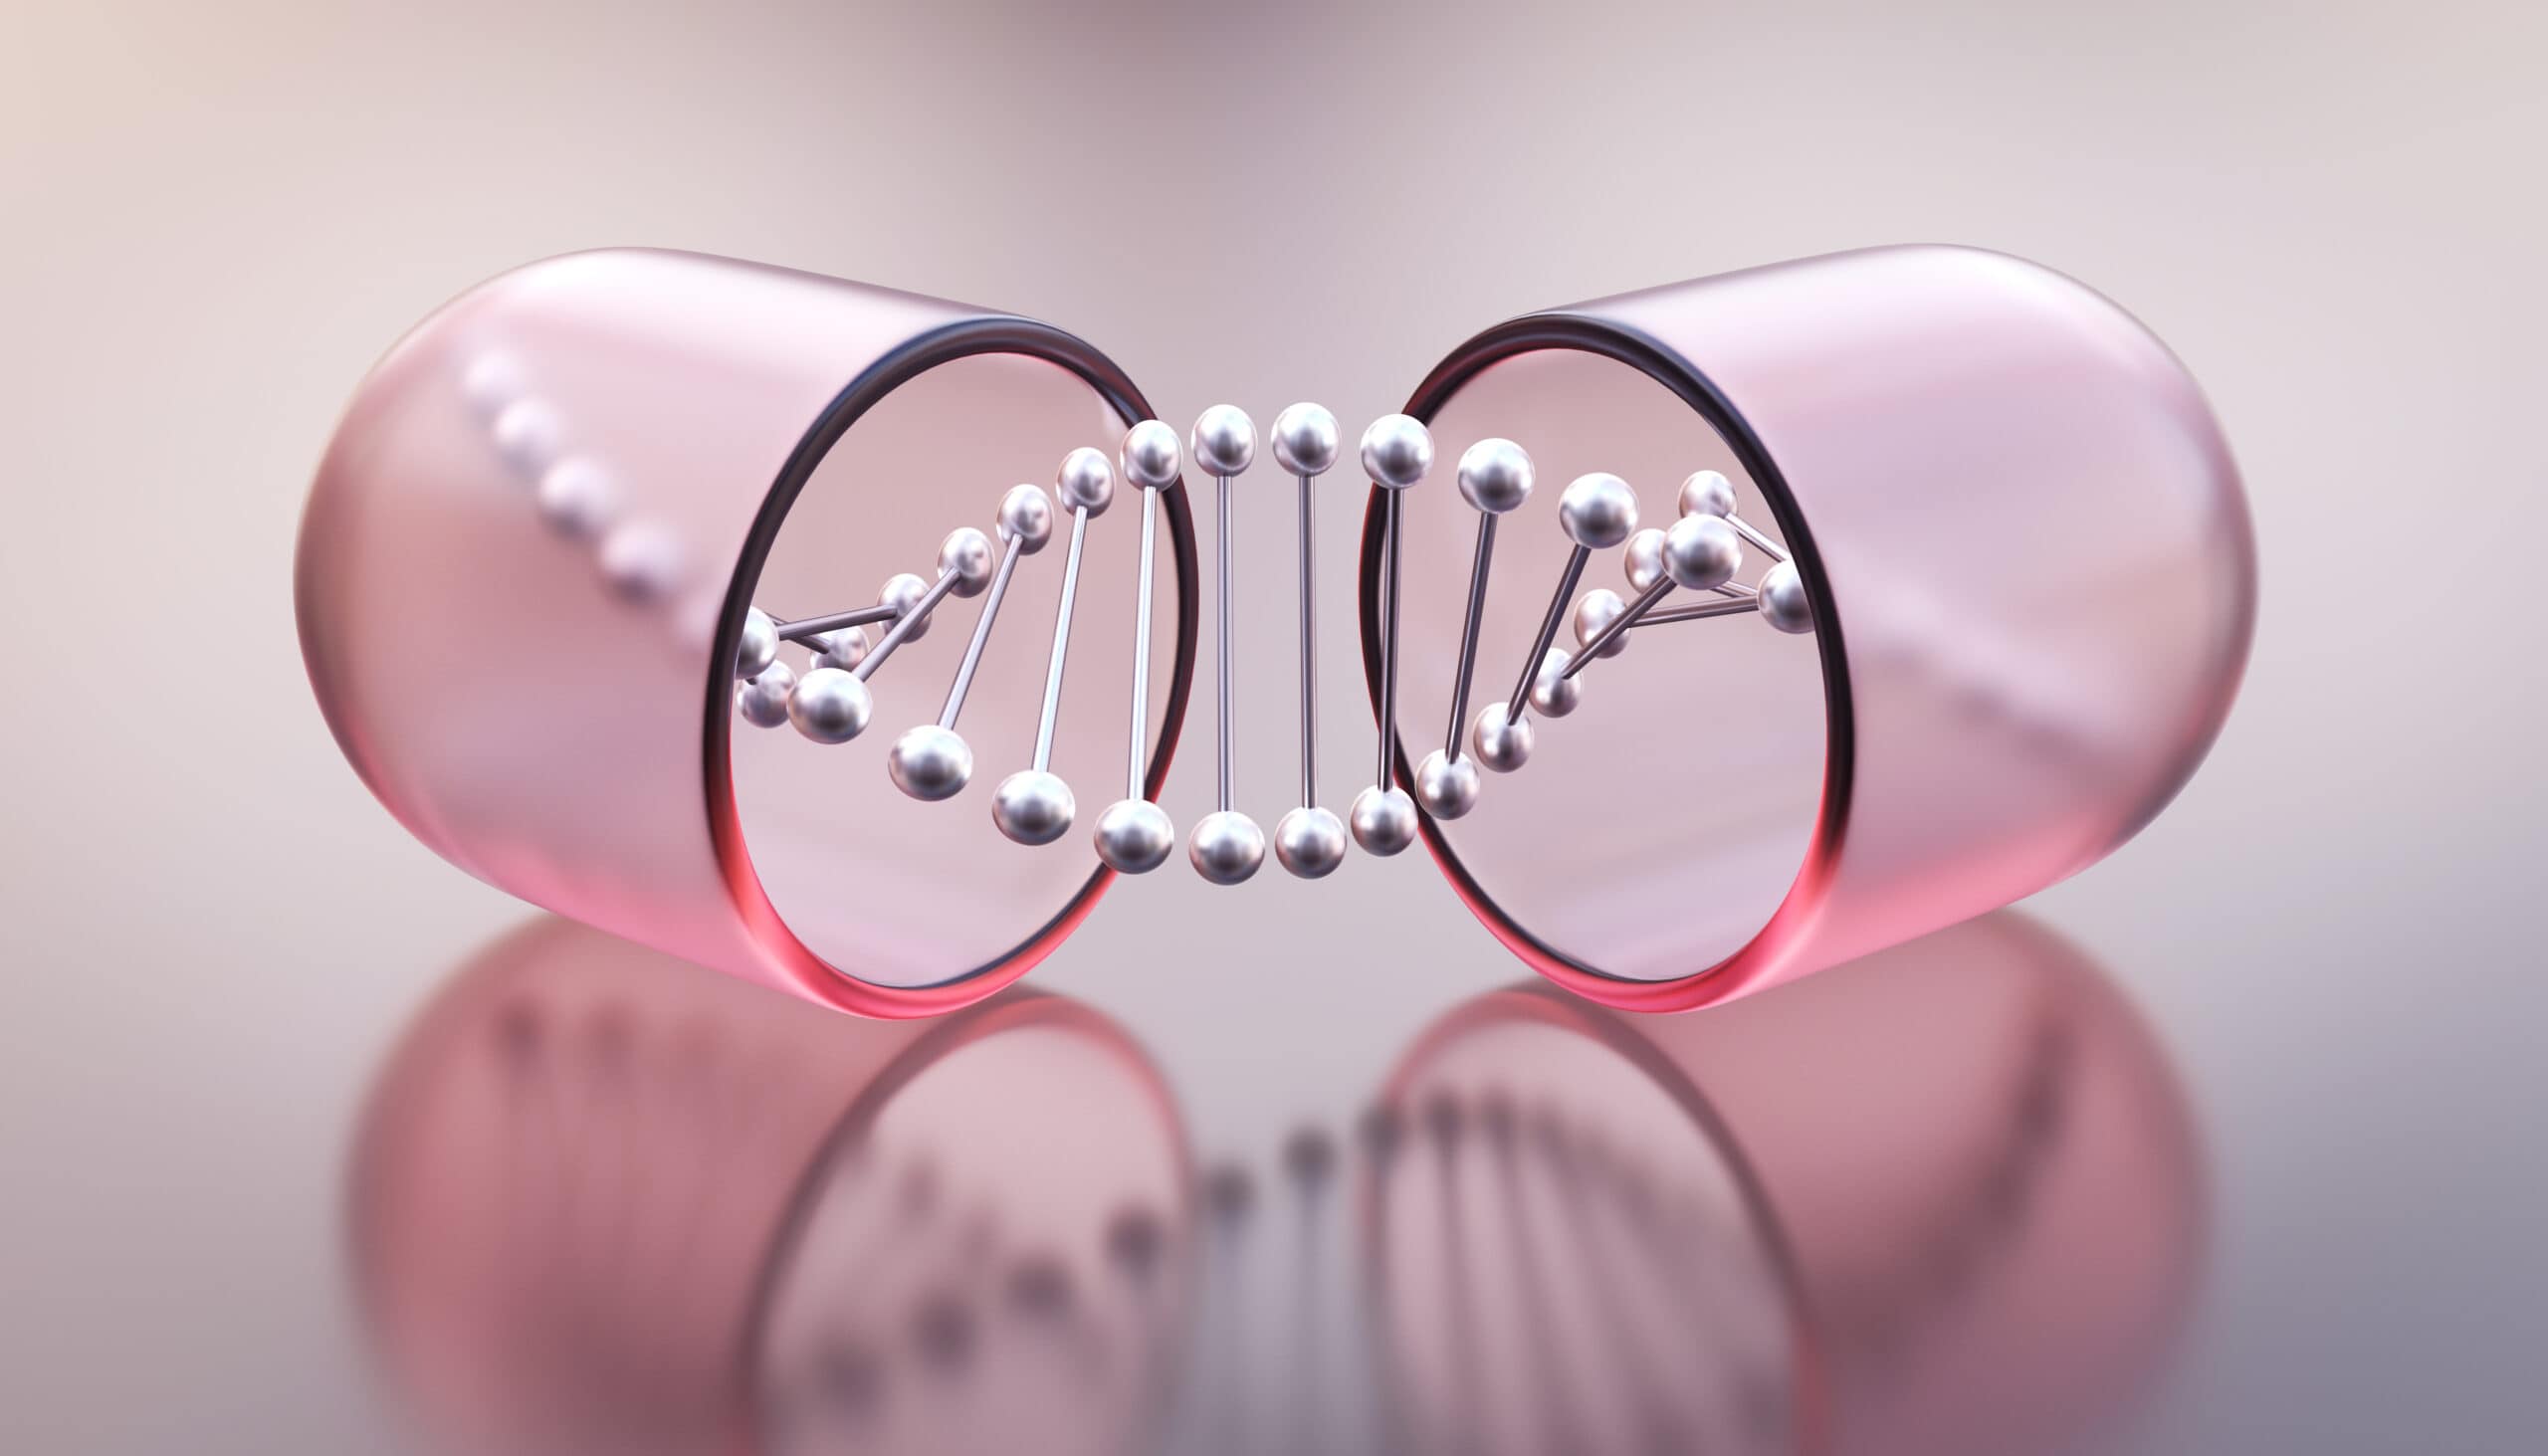 Cell and gene therapies are currently at the forefront of medical research and innovation due to their potential to revolutionize the treatment of various diseases by harnessing the power of genetics and cellular biology.